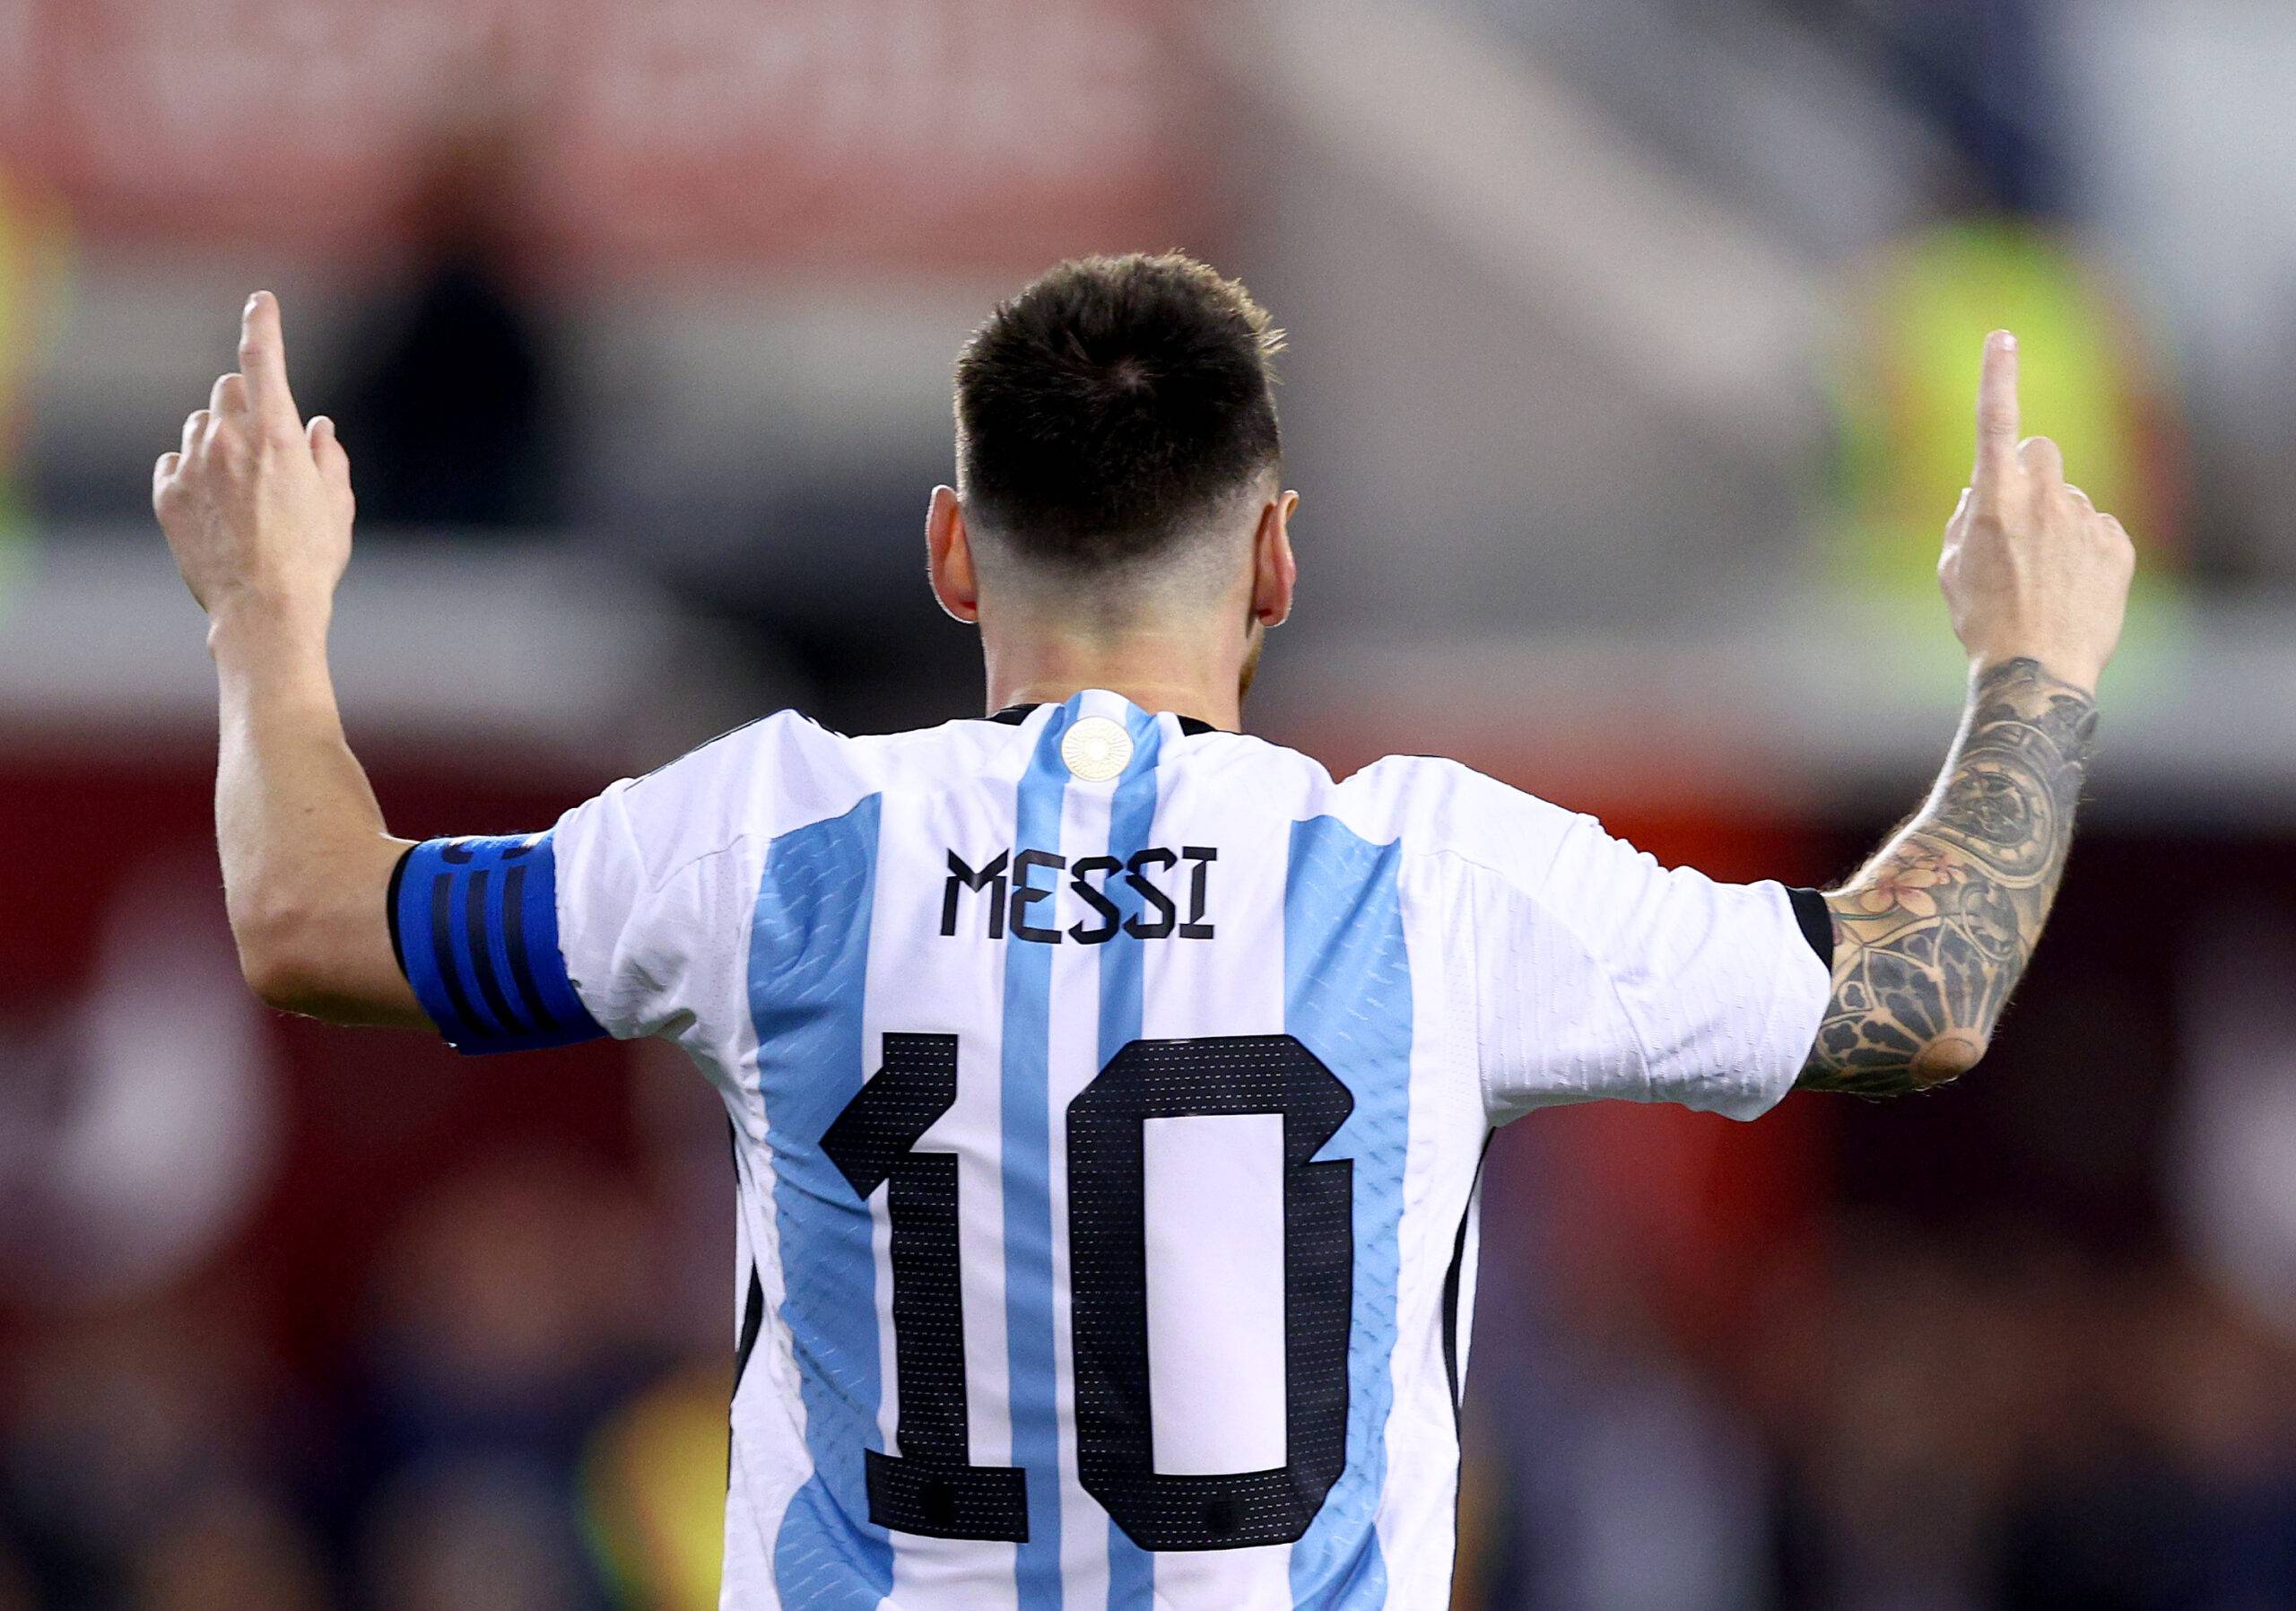 Messi pointing his fingers to the sky after scoring for Argentina